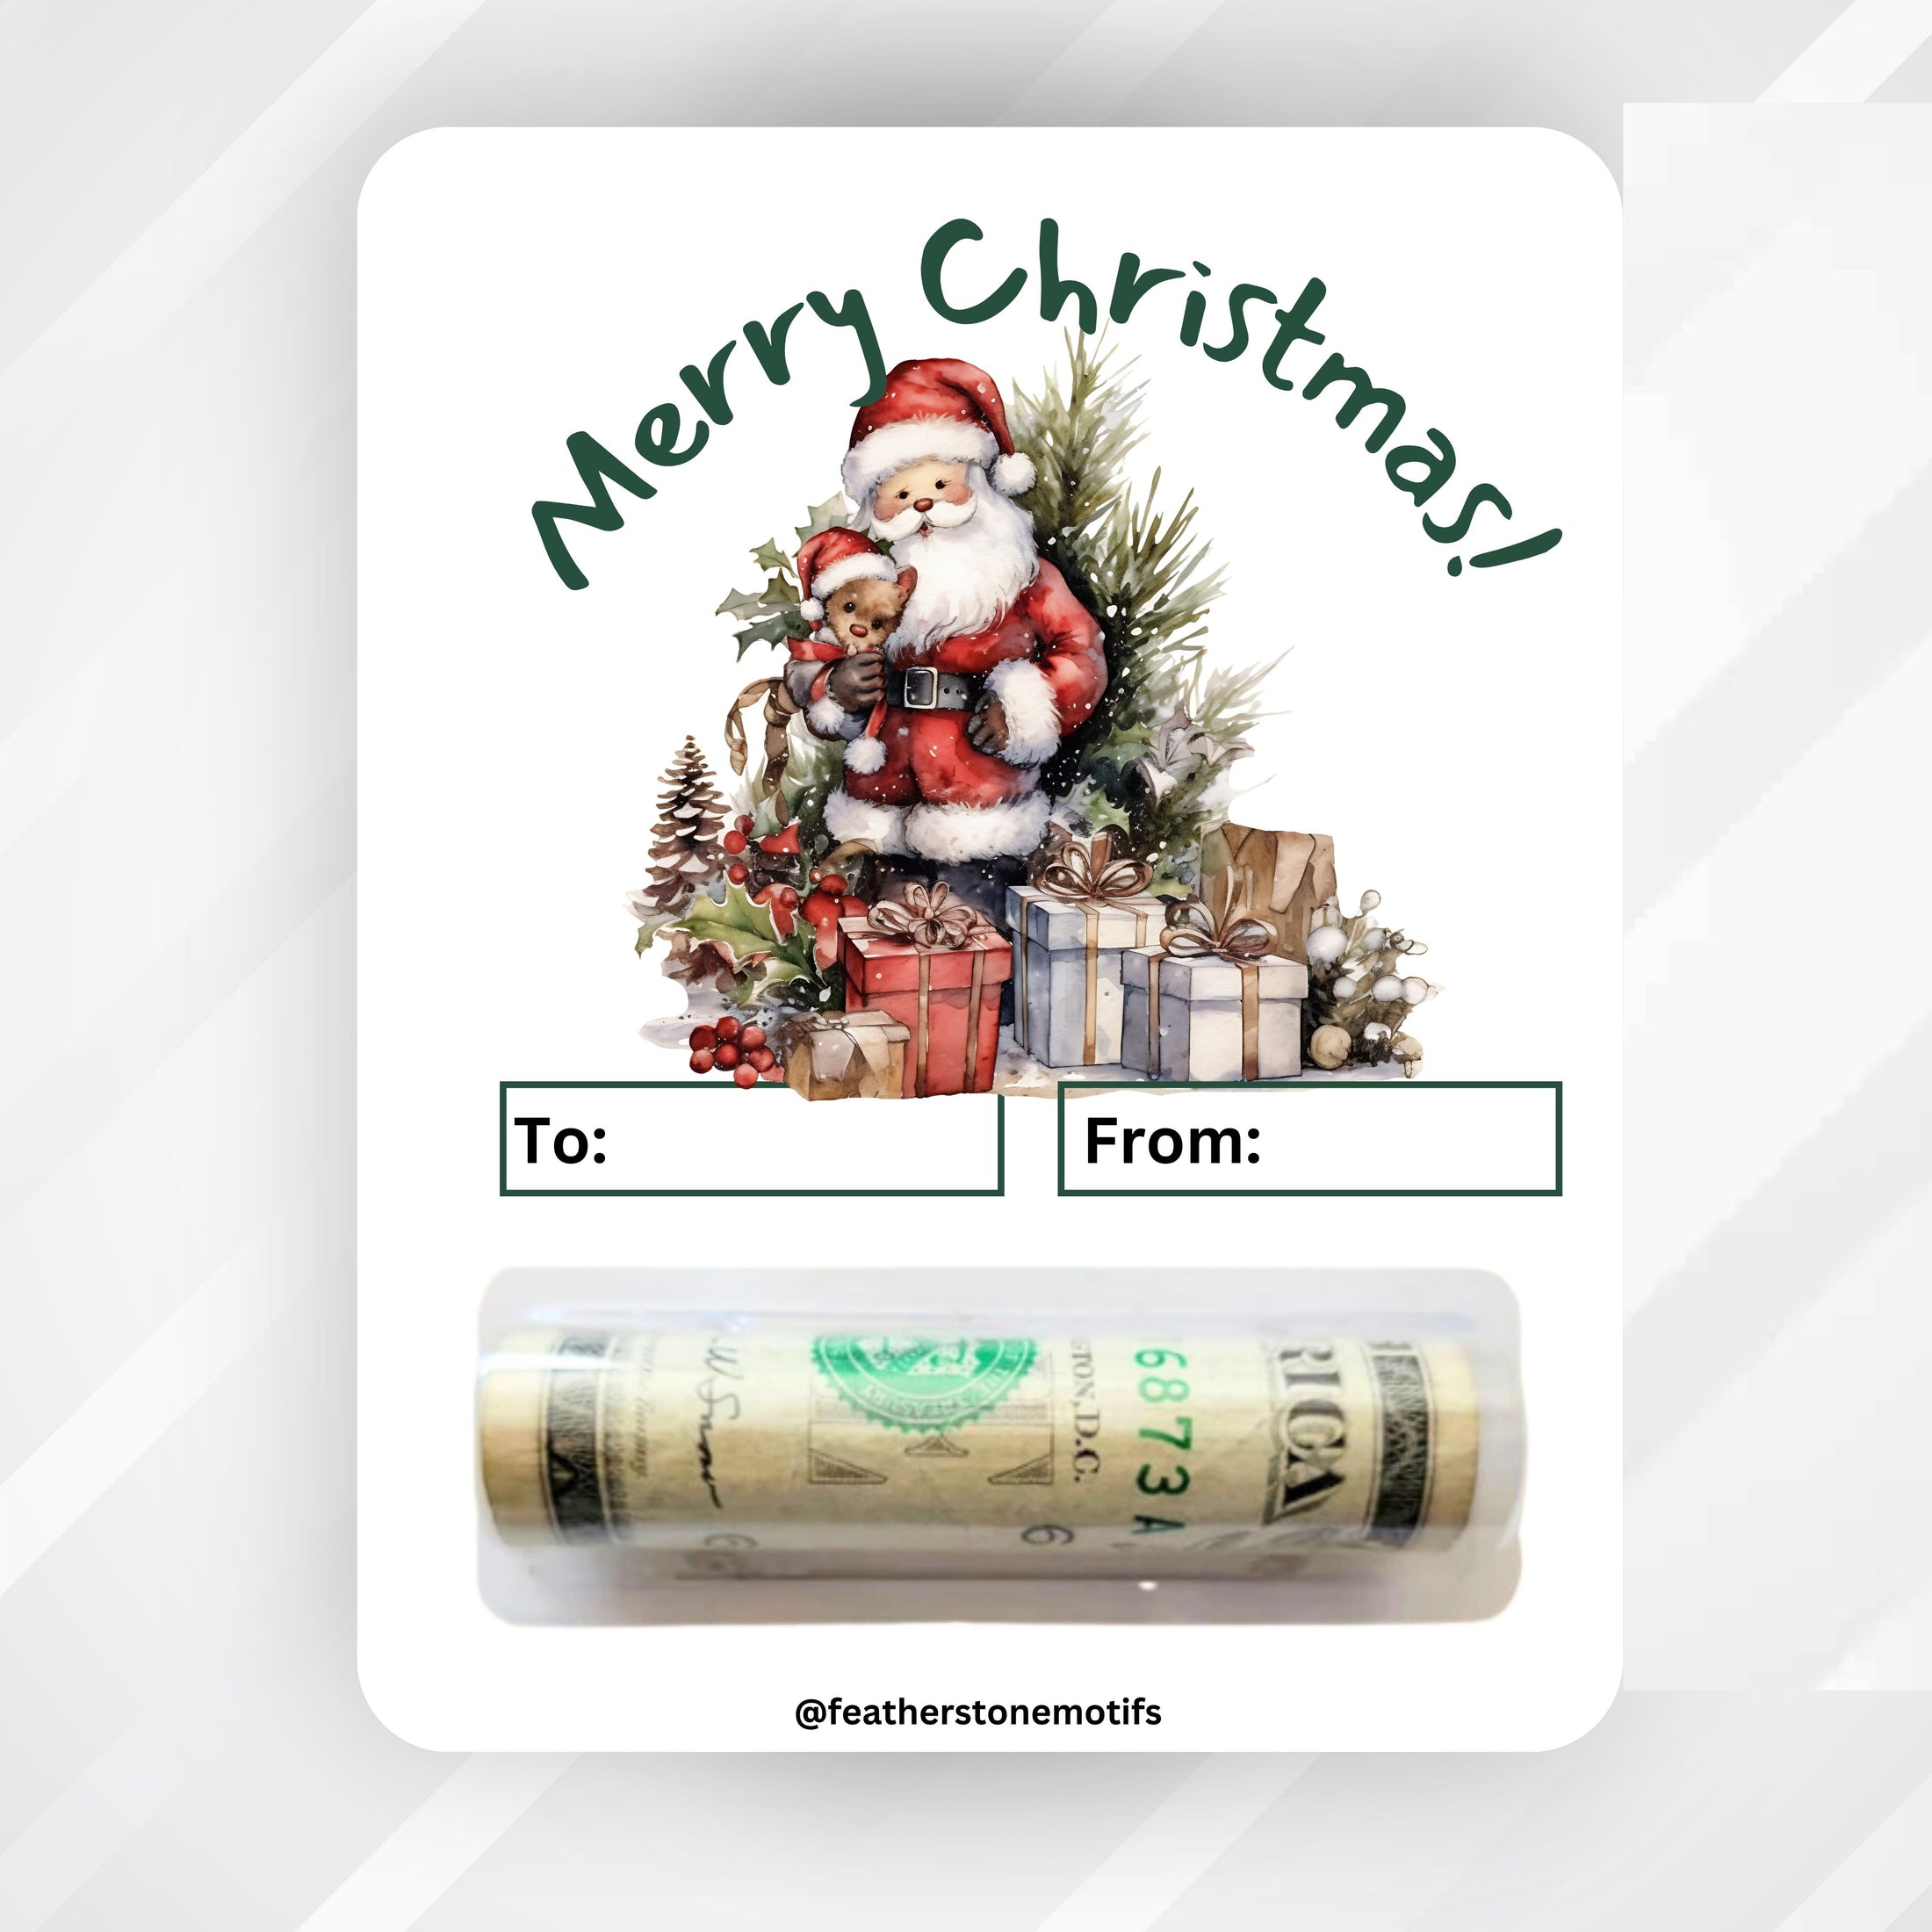 This image shows the money tube attached to the Santa with a Bear Money Card.